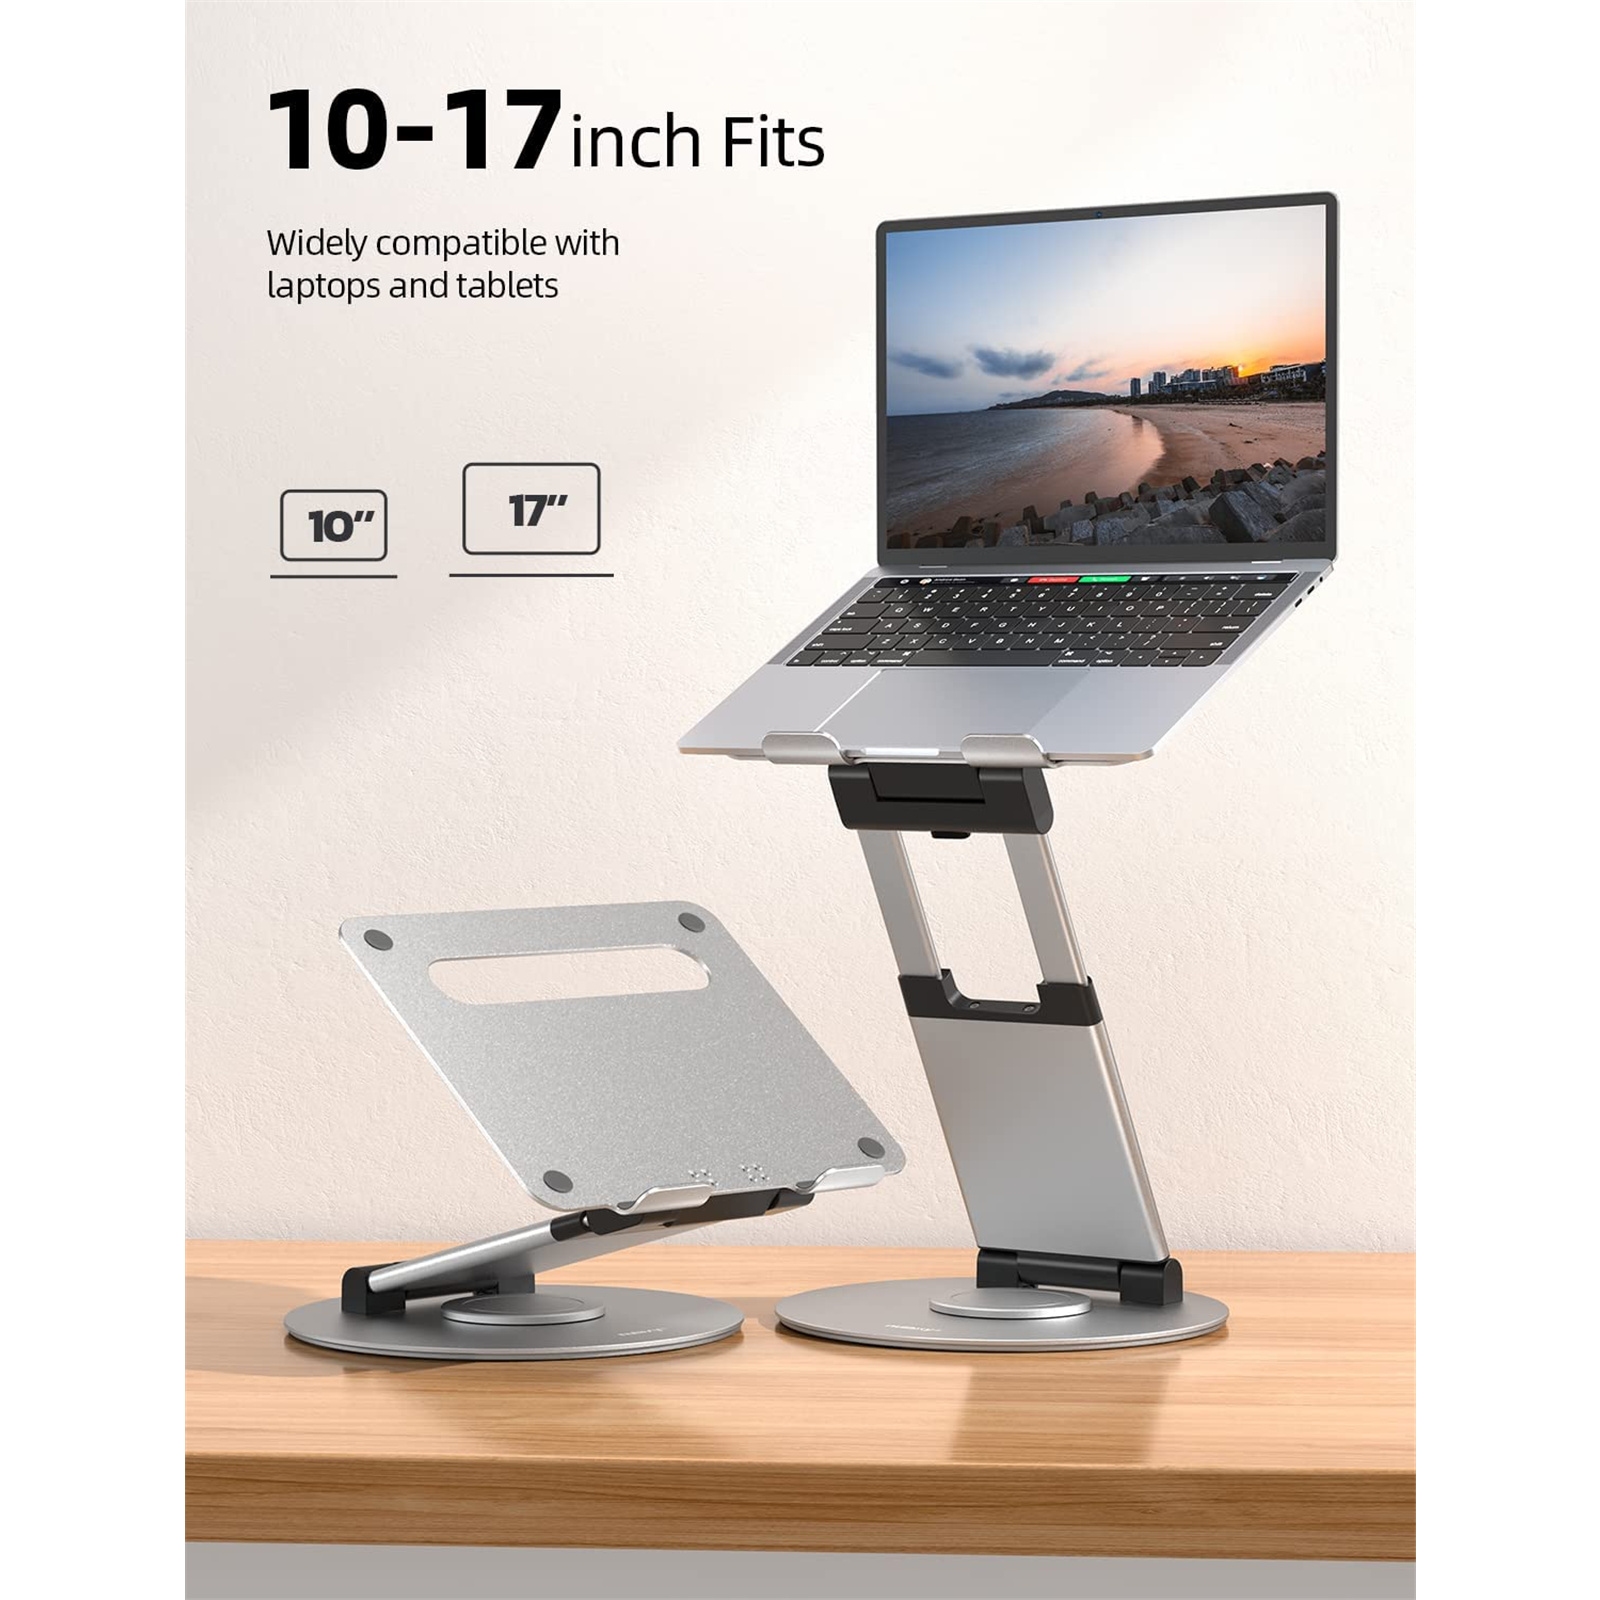 Nulaxy LS18 360° Rotating Laptop Stand Silver For Collaborative Work Compatible with 10 17 Apple MacBook Laptops NZDEPOT 4 - NZ DEPOT